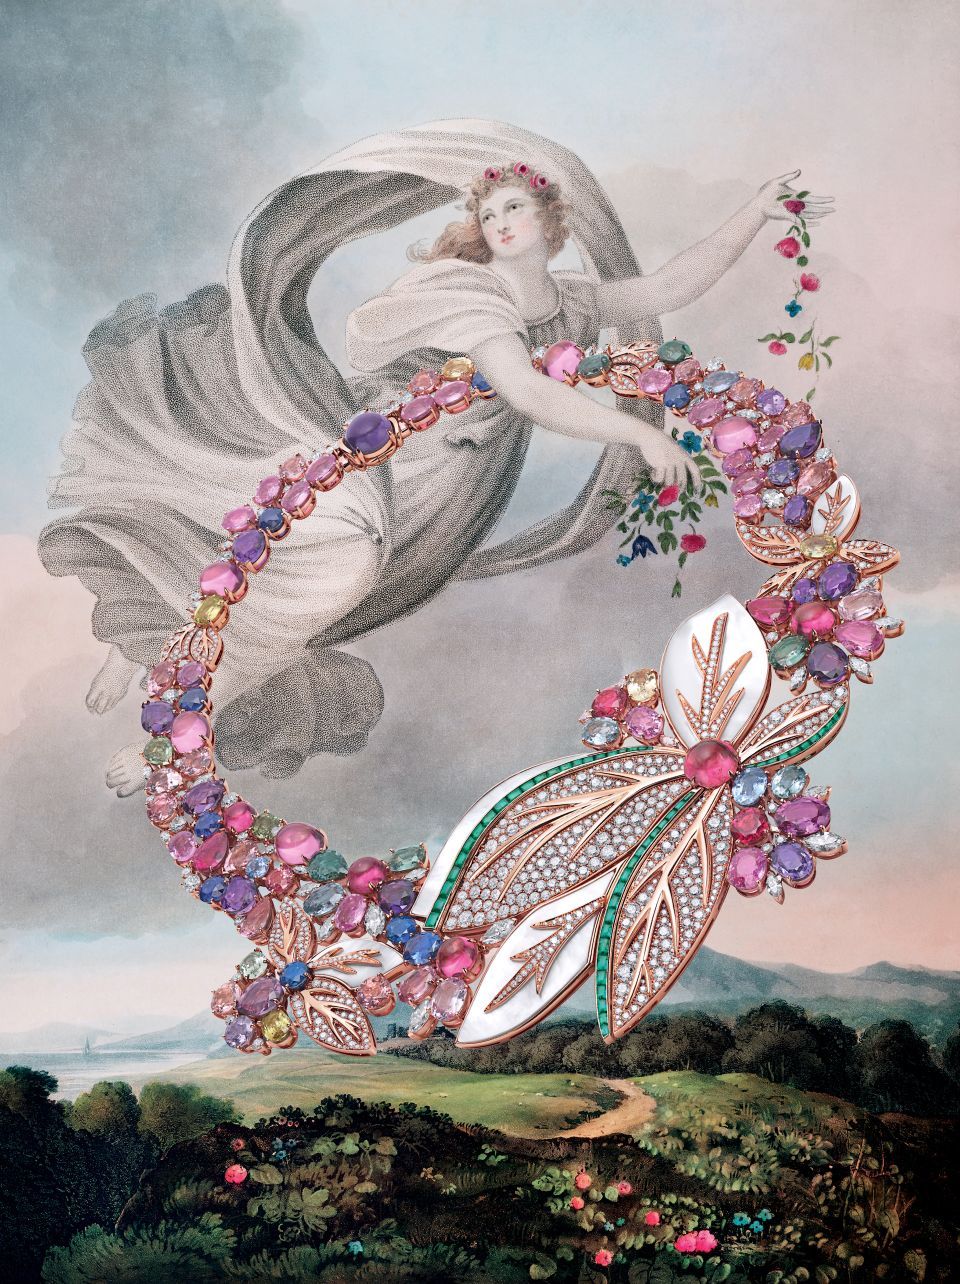 The Bulgari Eden: The Garden of Wonders high jewellery collection is an ode  to Roman gardens